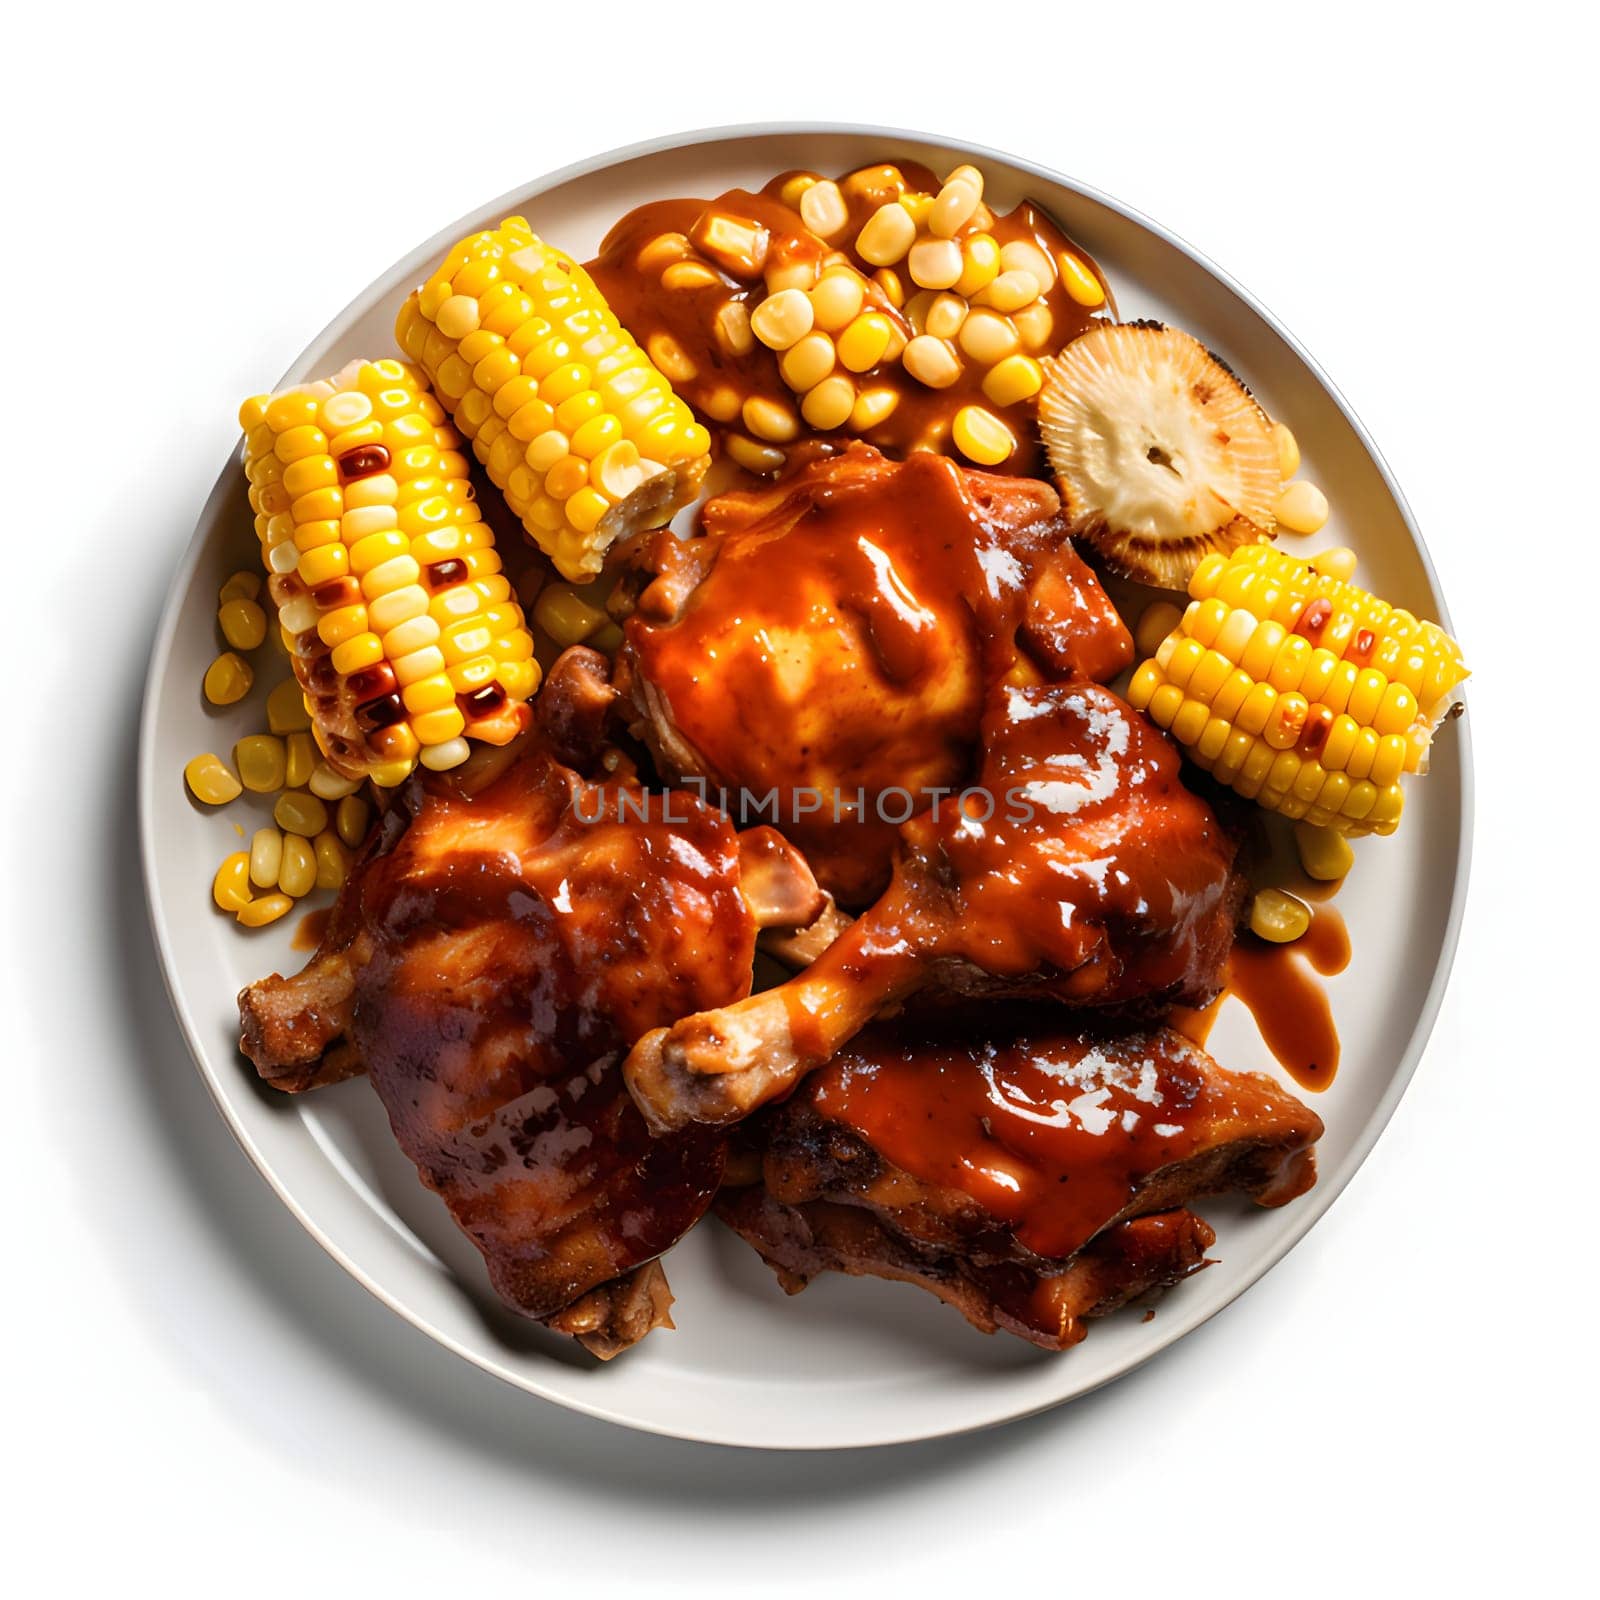 Top view of a plate with roasted chicken thighs and corn cobs on it. Corn as a dish of thanksgiving for the harvest, a picture on a white isolated background. An atmosphere of joy and celebration.